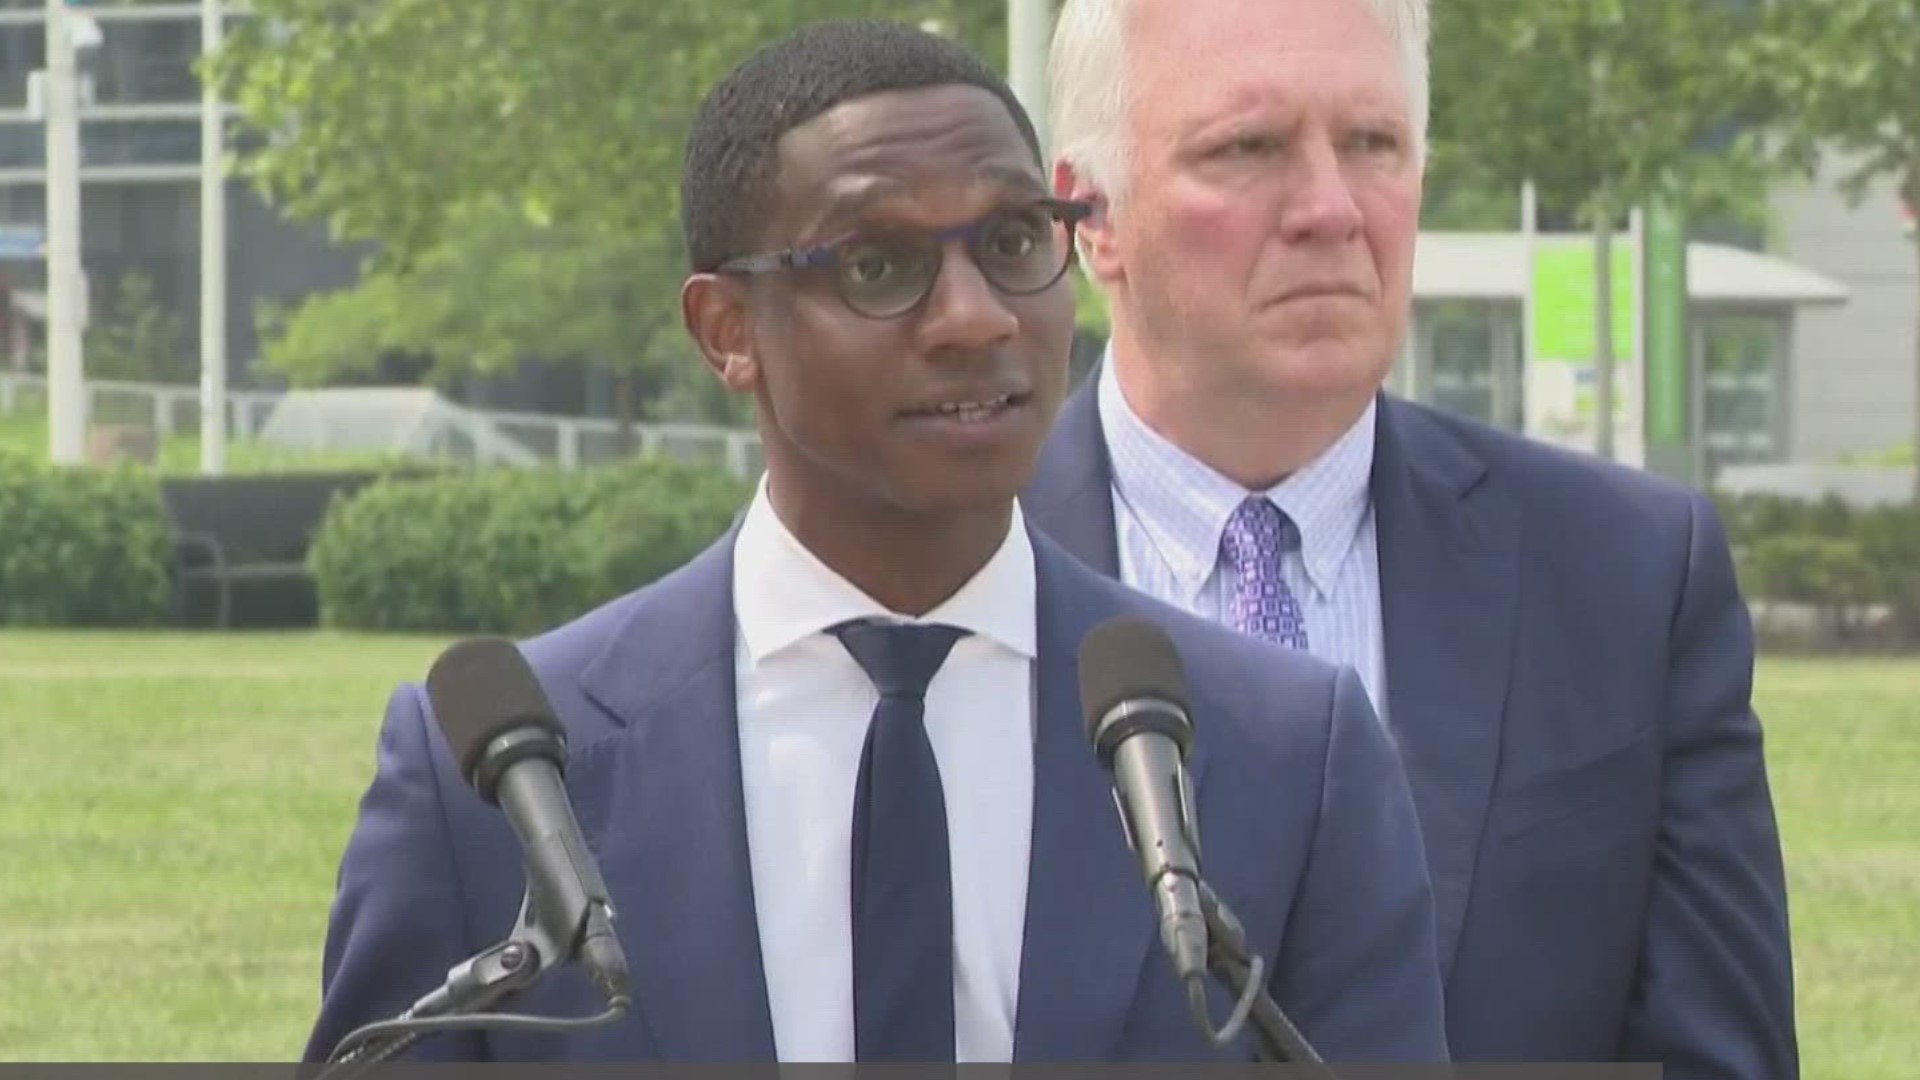 Cleveland Mayor Justin Bibb is sending a message to judges as he addressed safety in the city: Keep repeat offenders off the streets.